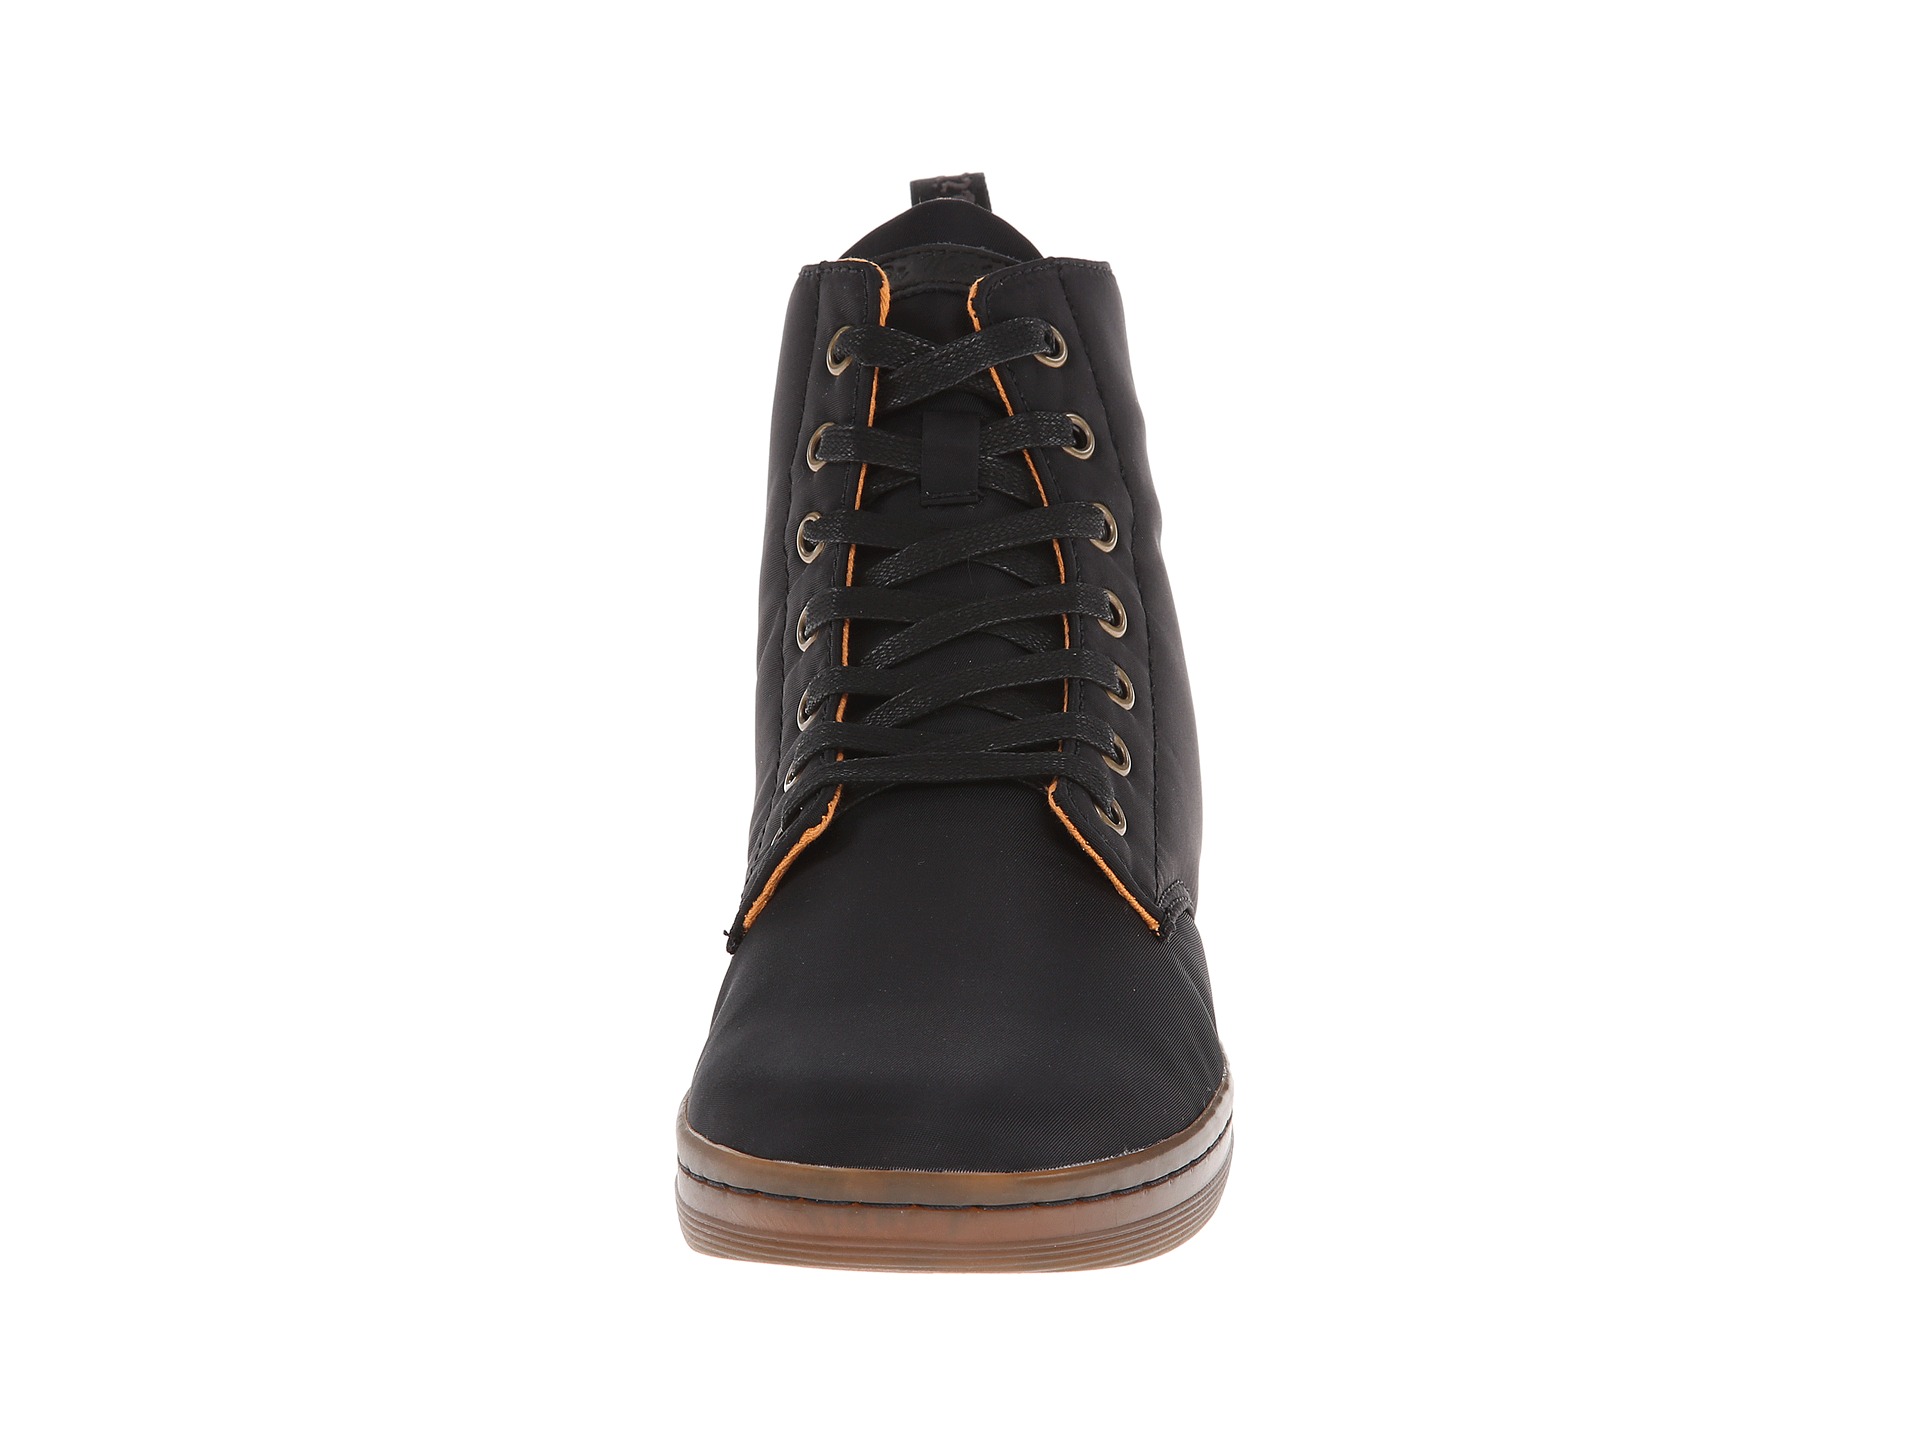 Dr Martens Hackney 7 Eye Boot | Shipped Free at Zappos